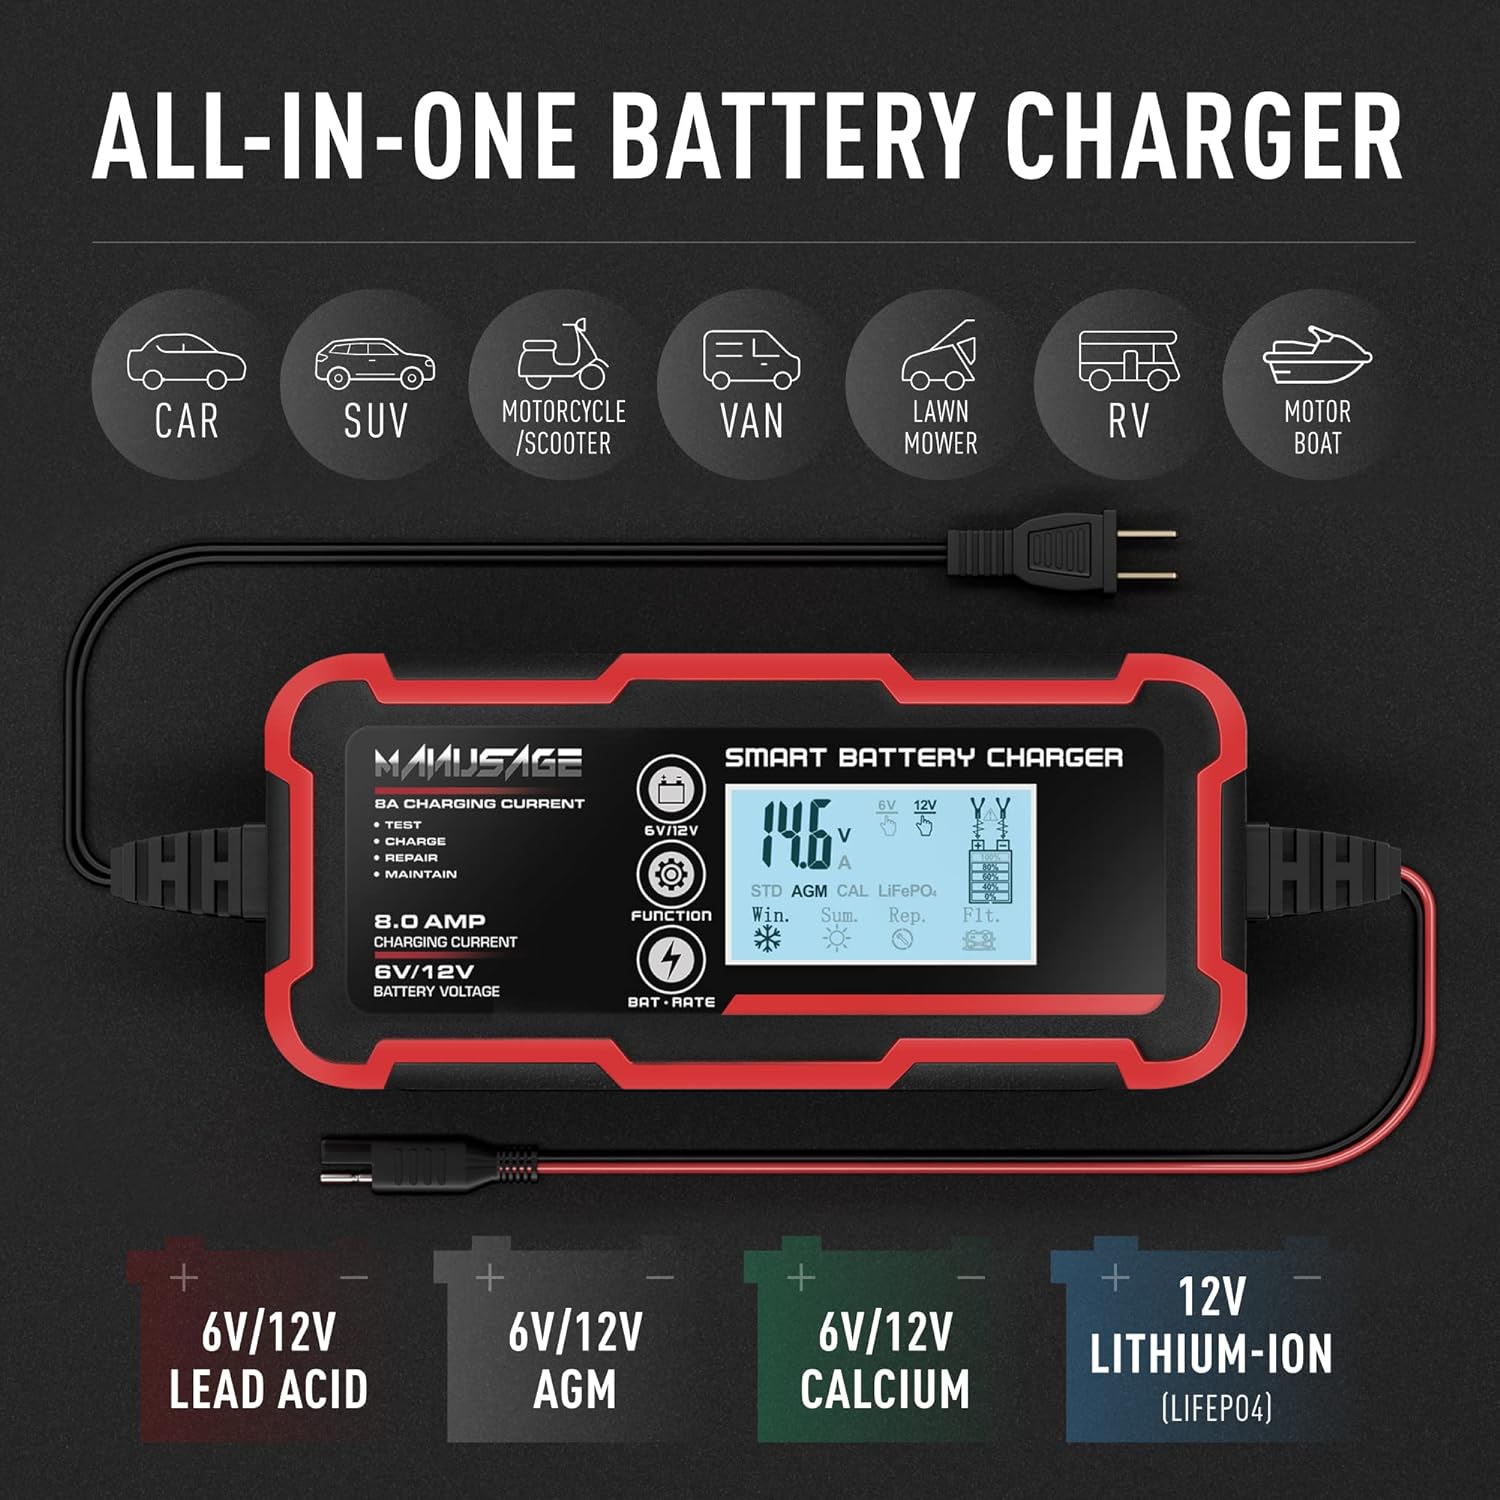 Manusage 8-Amp Fully-Automatic Smart Charger, 6V and 12V Portable Automotive Car Battery Charger, Battery Maintainer, Trickle Charger,Battery Desulfator with Temperature Compensation, AGM,Deep Cycle 4A/8A Charging Current, 6V/12V DC Output